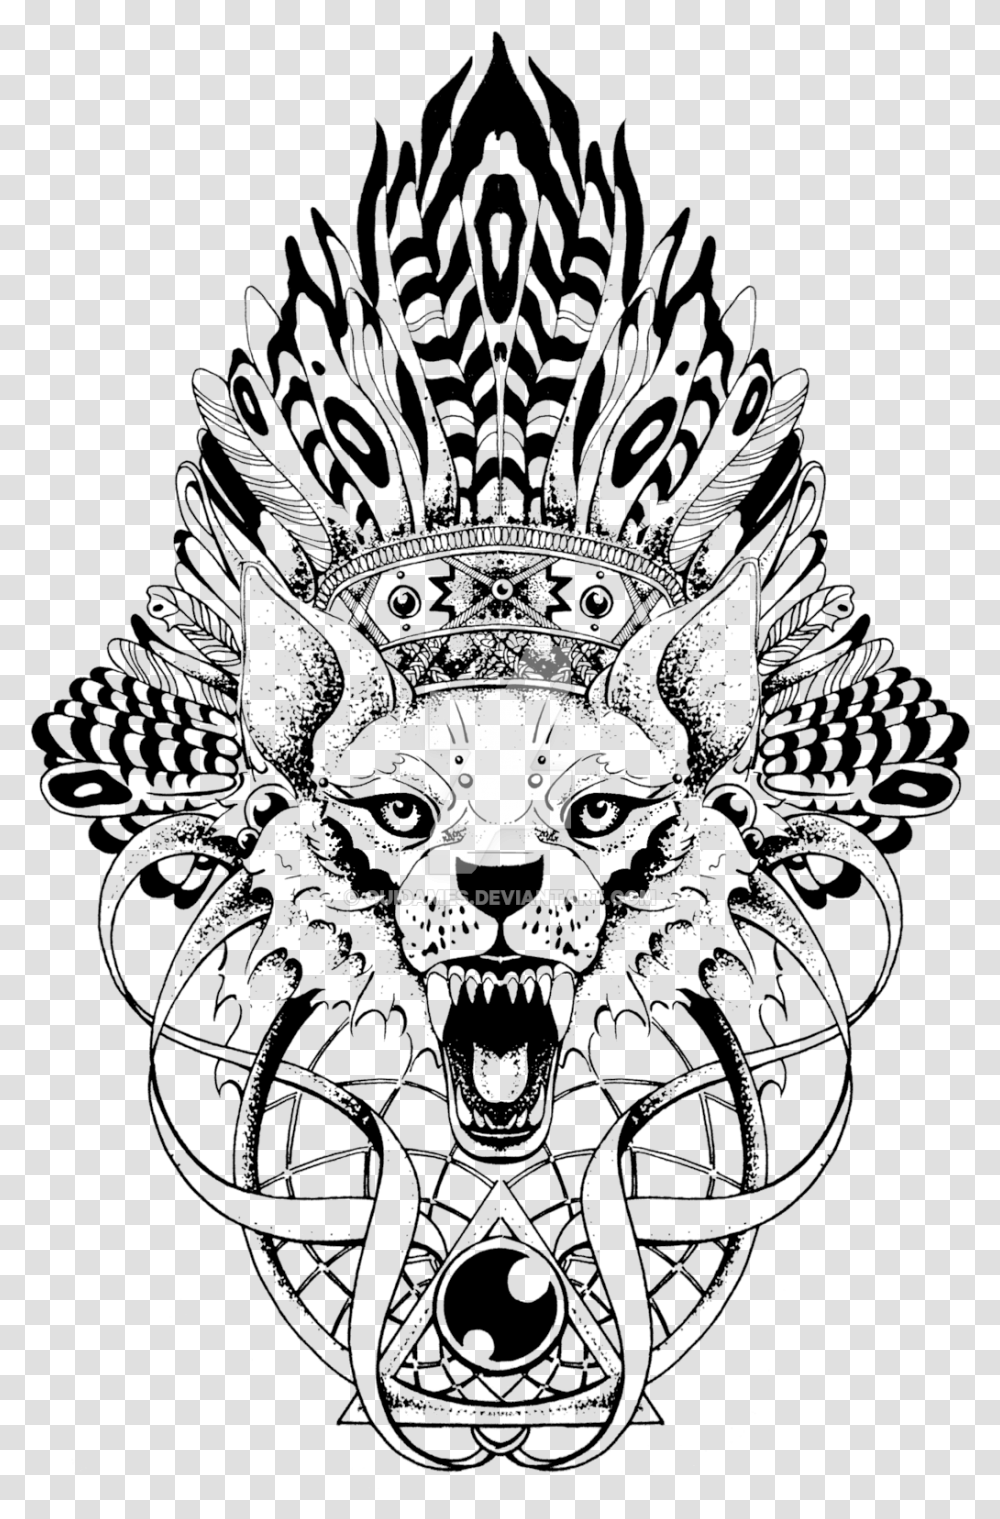 Download Angry Wolf By Quidames D6bxdir Wolf Totem Pole Tattoo For Hand, Symbol, Emblem, Cross, Logo Transparent Png